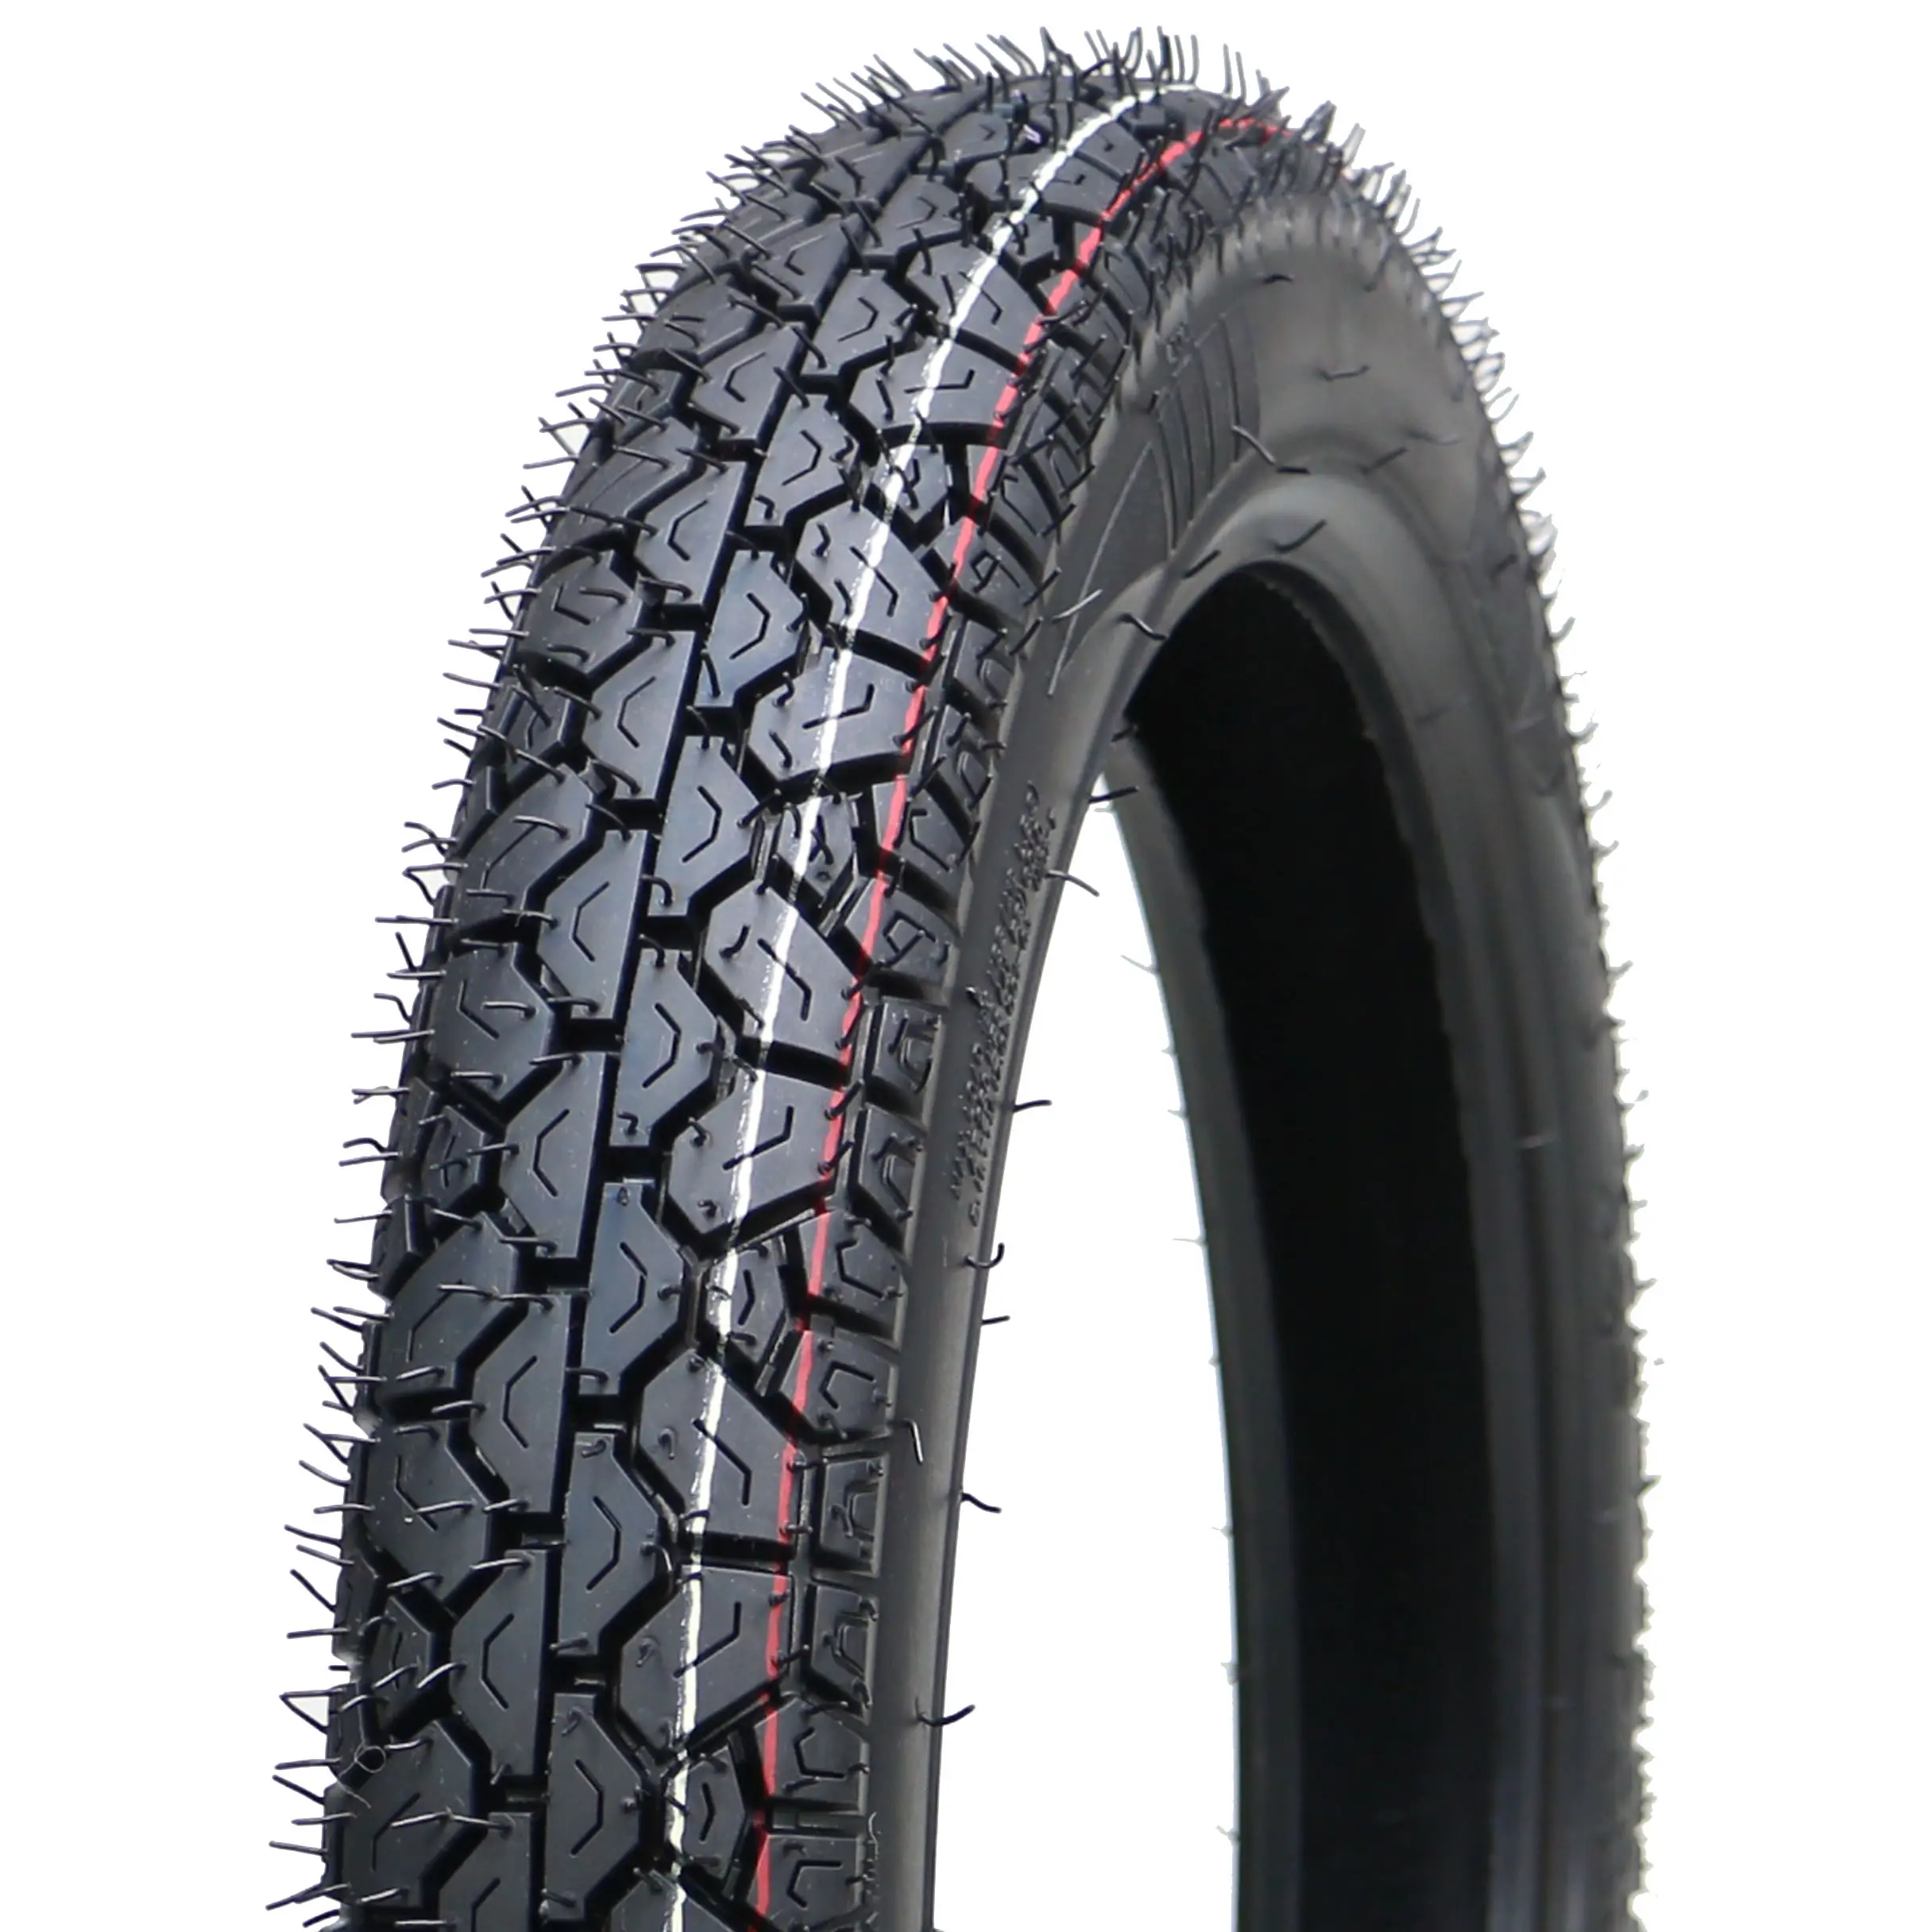 SOSOON brand motorcycle tyre 3.00-17 SY-168 more than 14 years factory